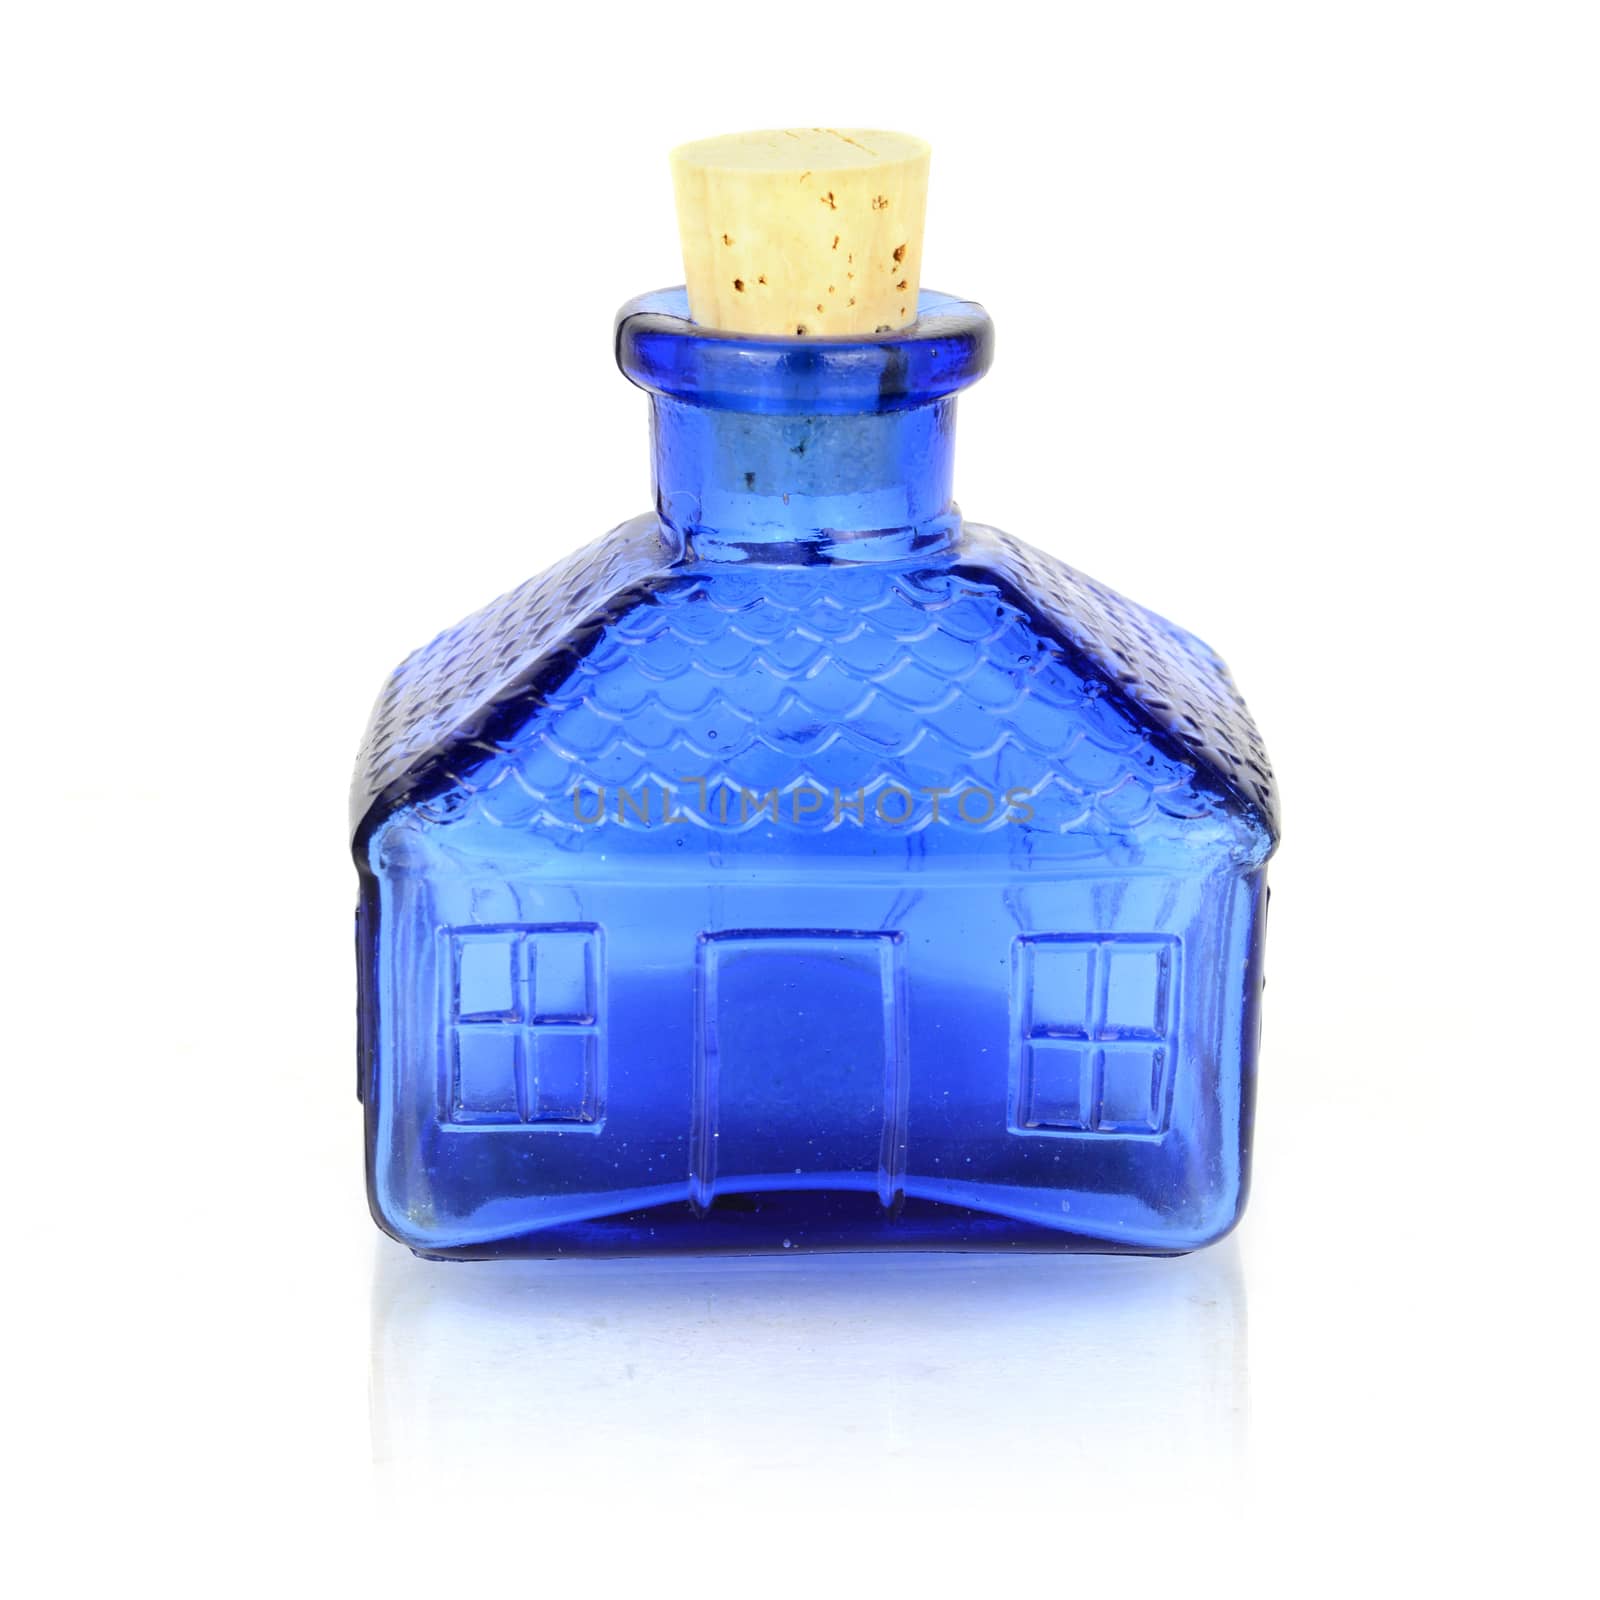 An isolated on a white reflective background image of an antique blue glass jar that is shaped like a house.